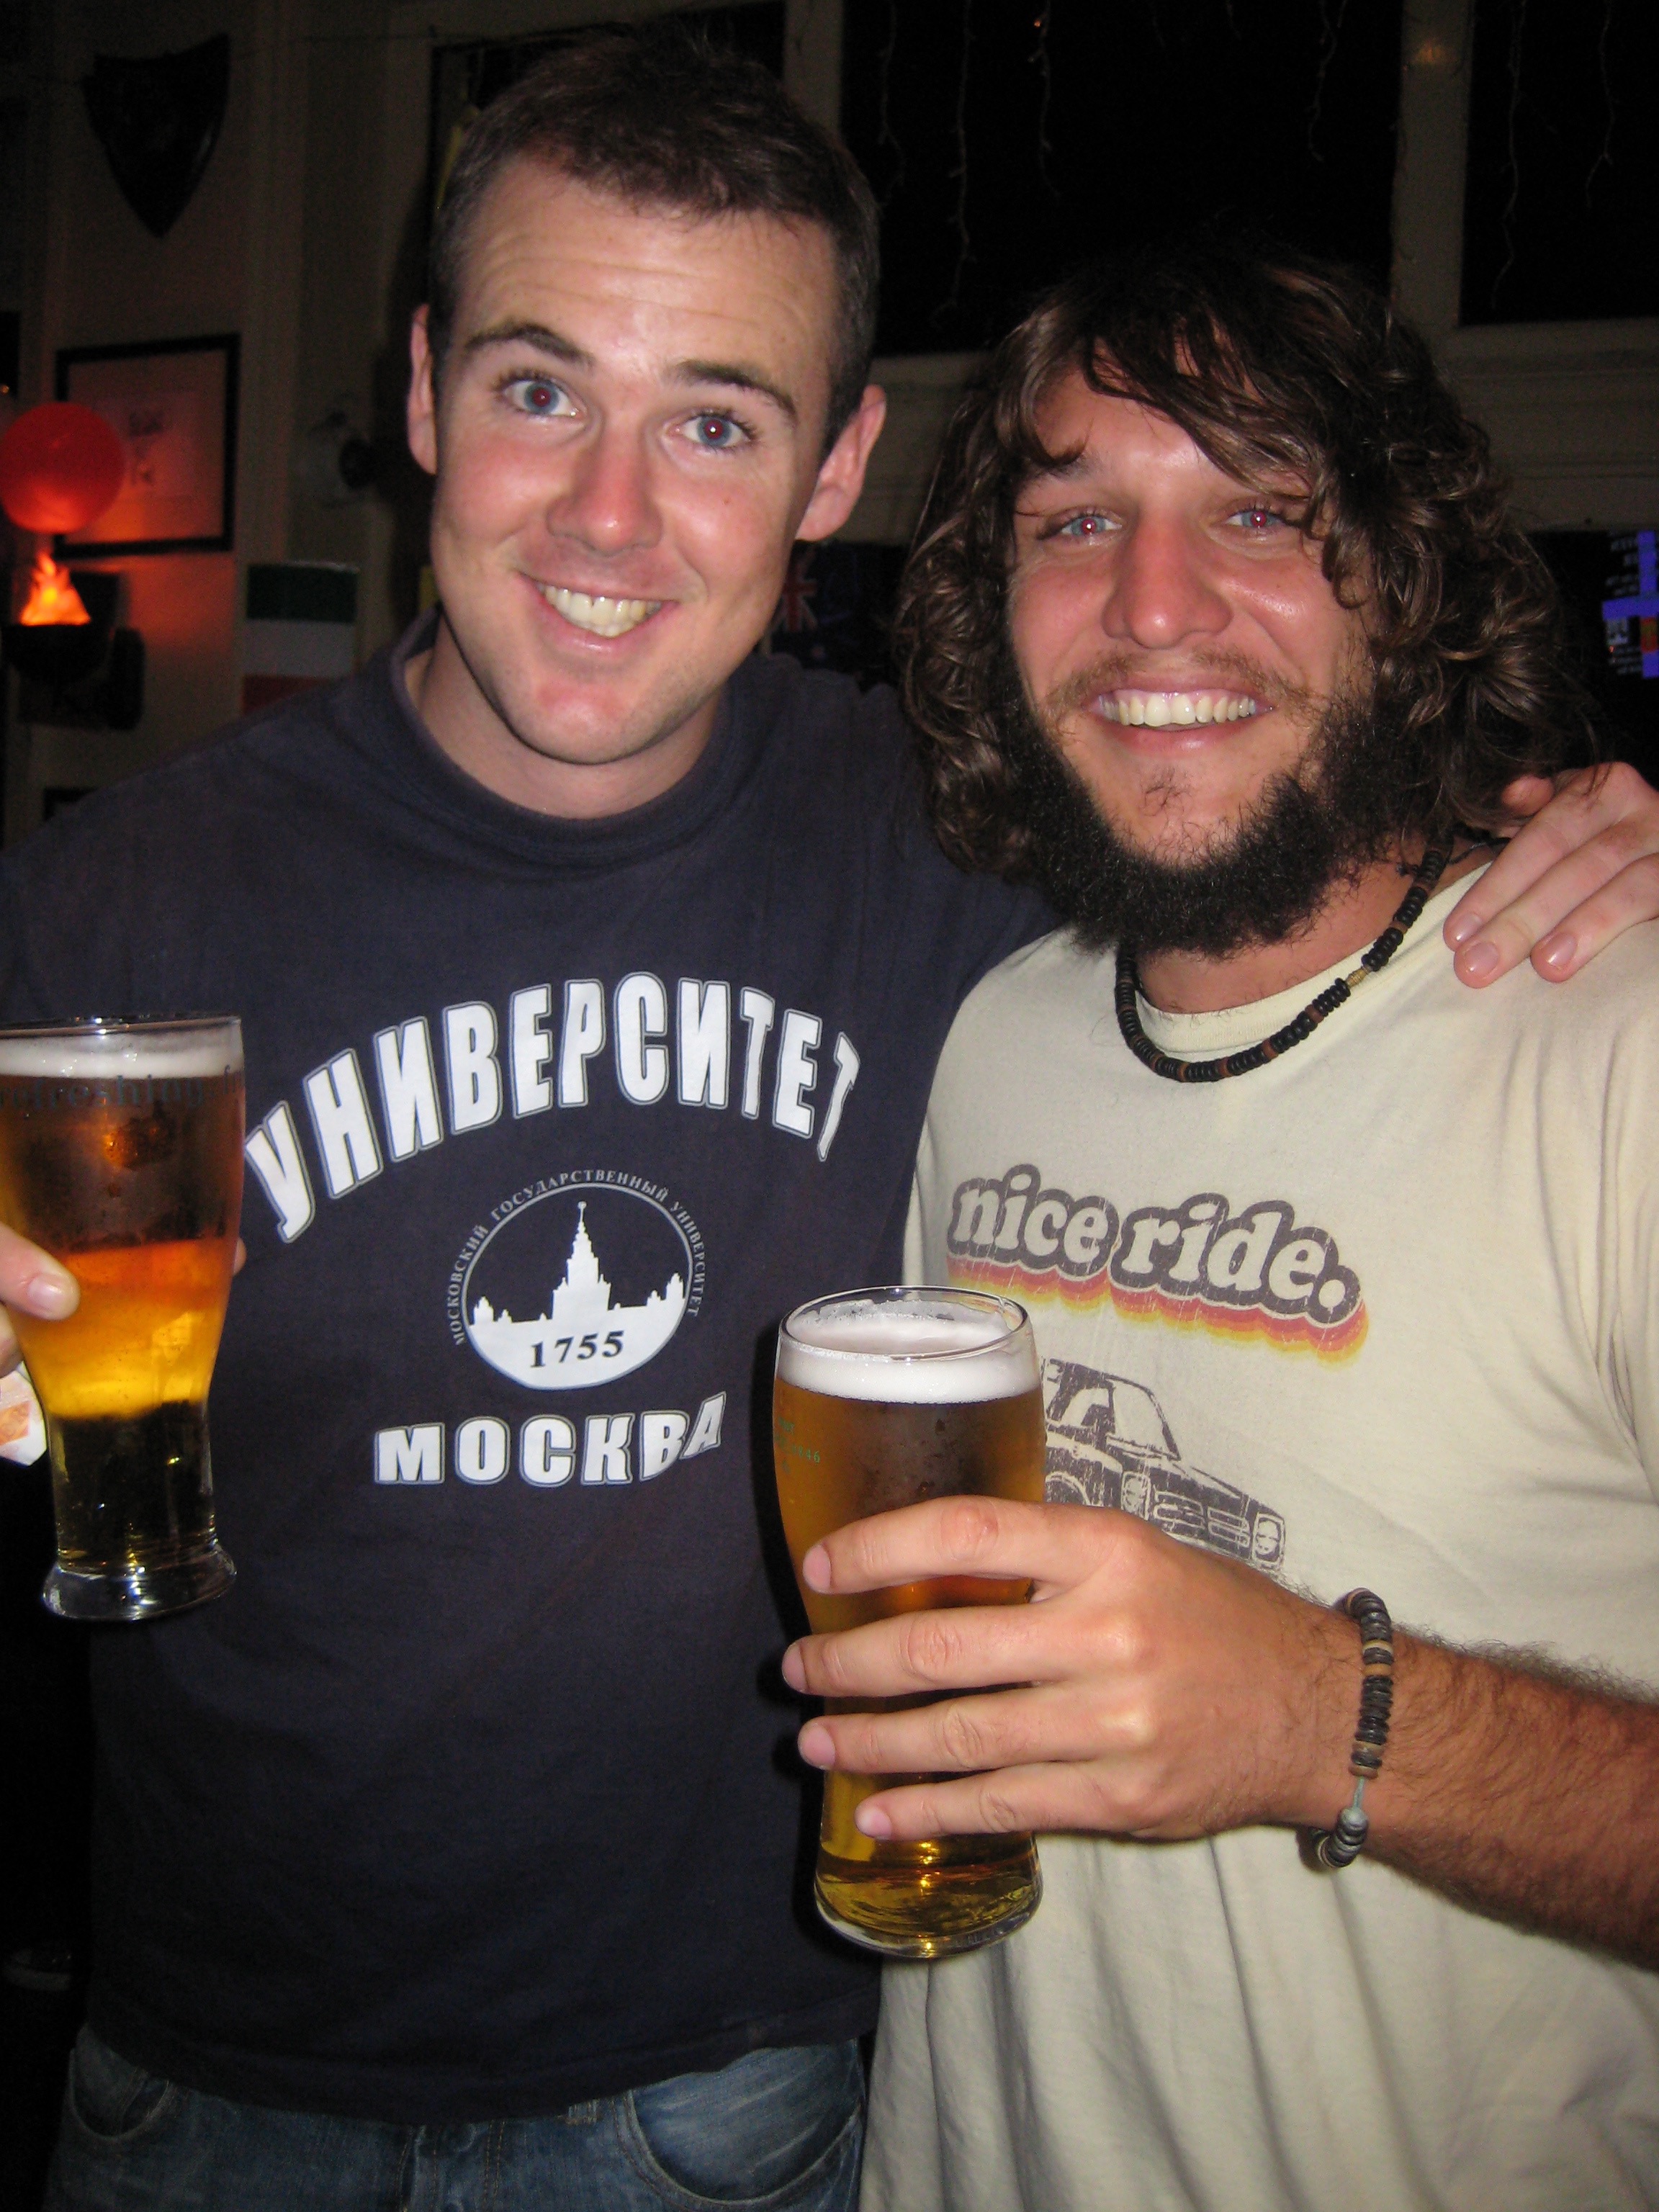 Roland and Justin drinking our first beer together in London, September 2007